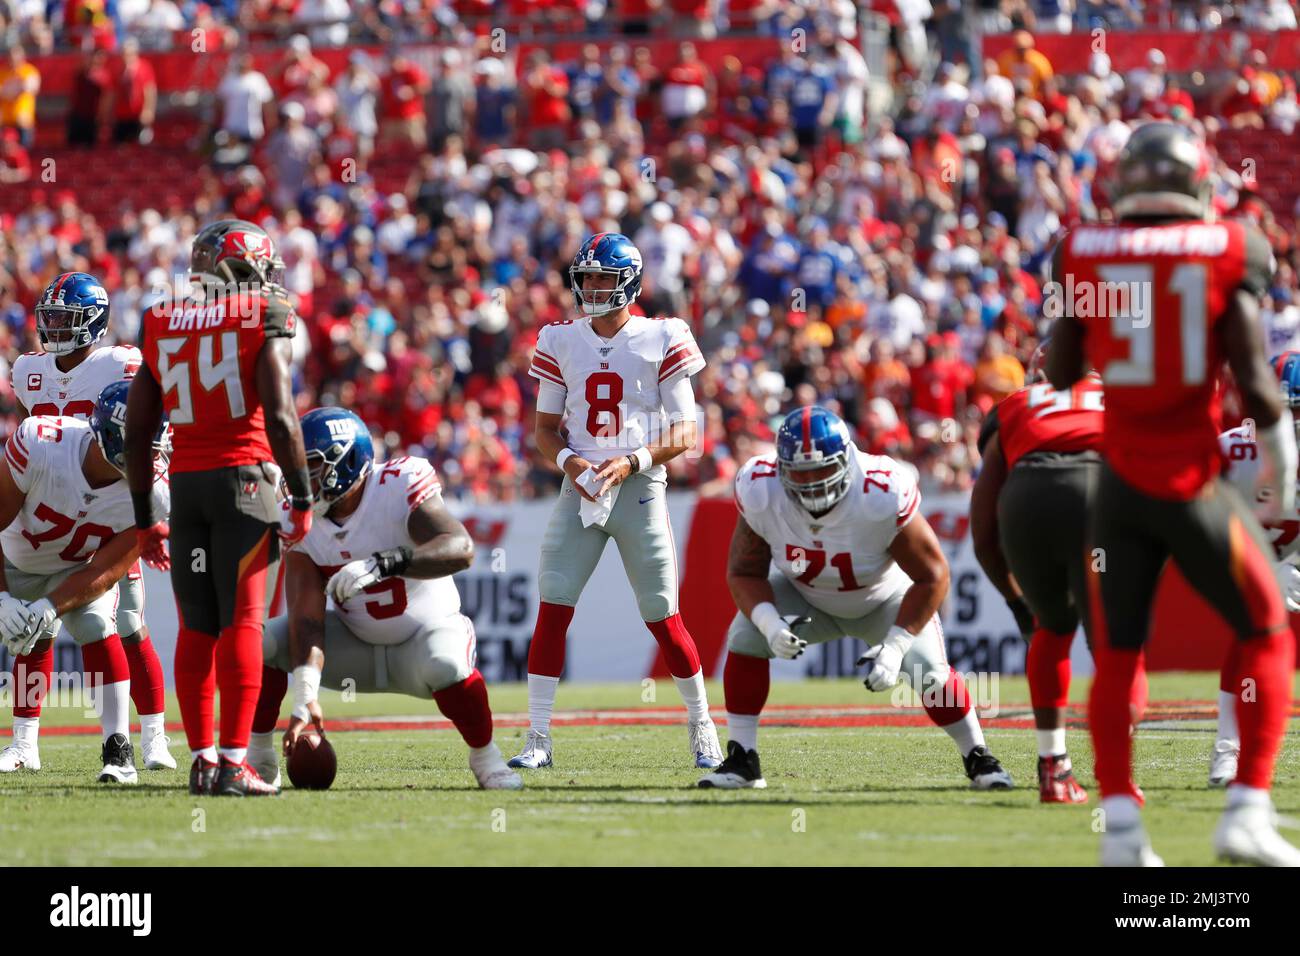 New York Giants quarterback Daniel Jones (8) against the Tampa Bay Buccaneers during the first half of an NFL football game Sunday, Sept. 22, 2019, in Tampa, Fla. (AP Photo/Mark LoMoglio) Stock Photo